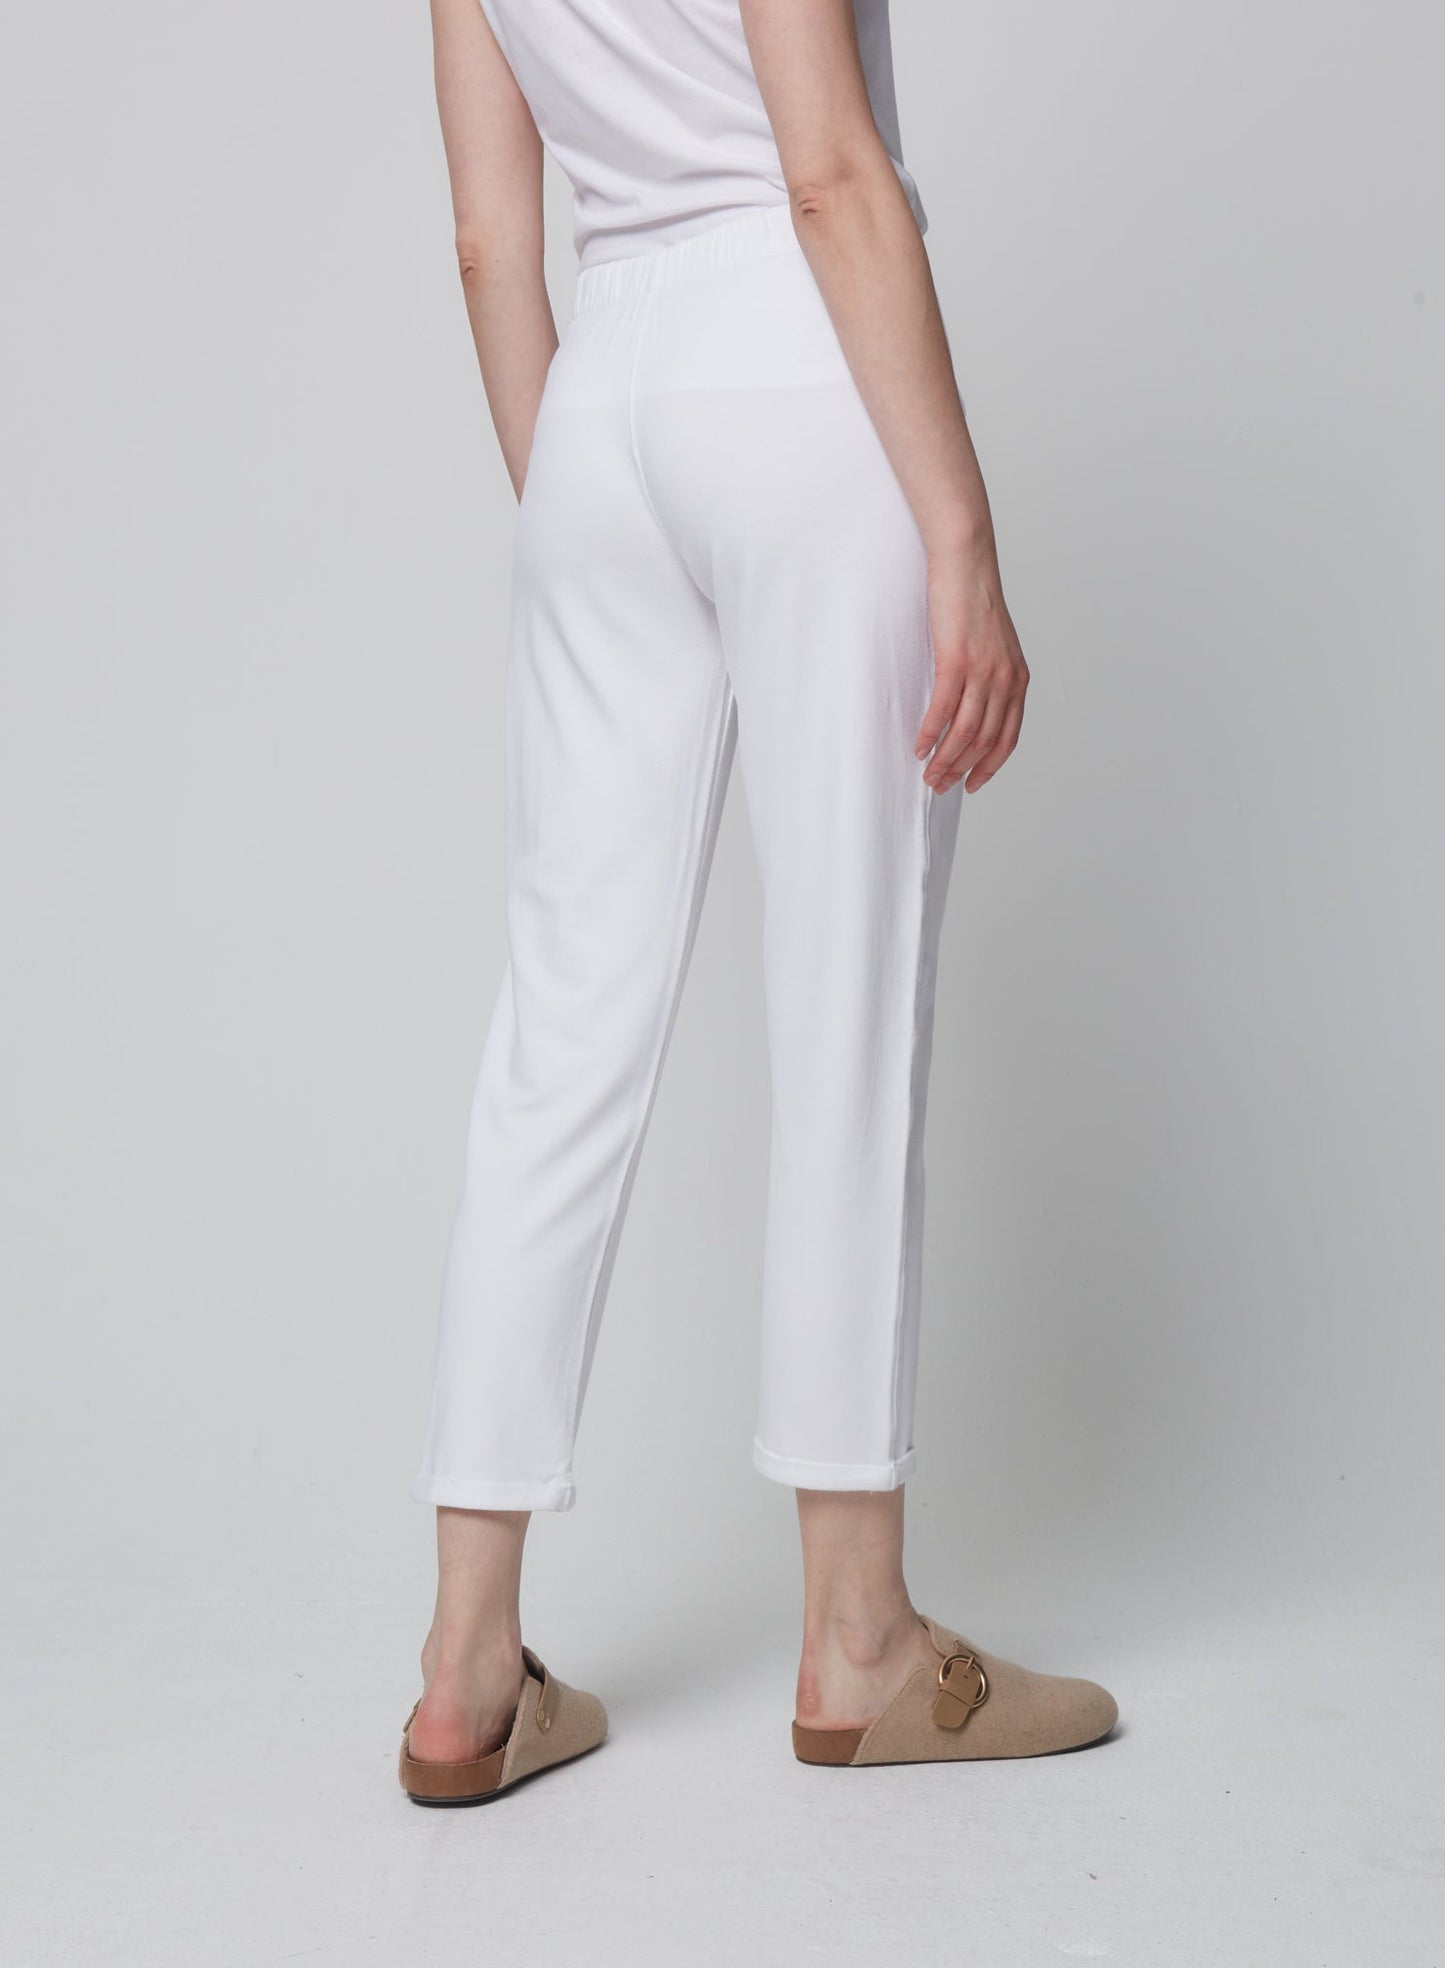 French Terry Drawstring Pant - BOTTOMS - Majestic Filatures North America